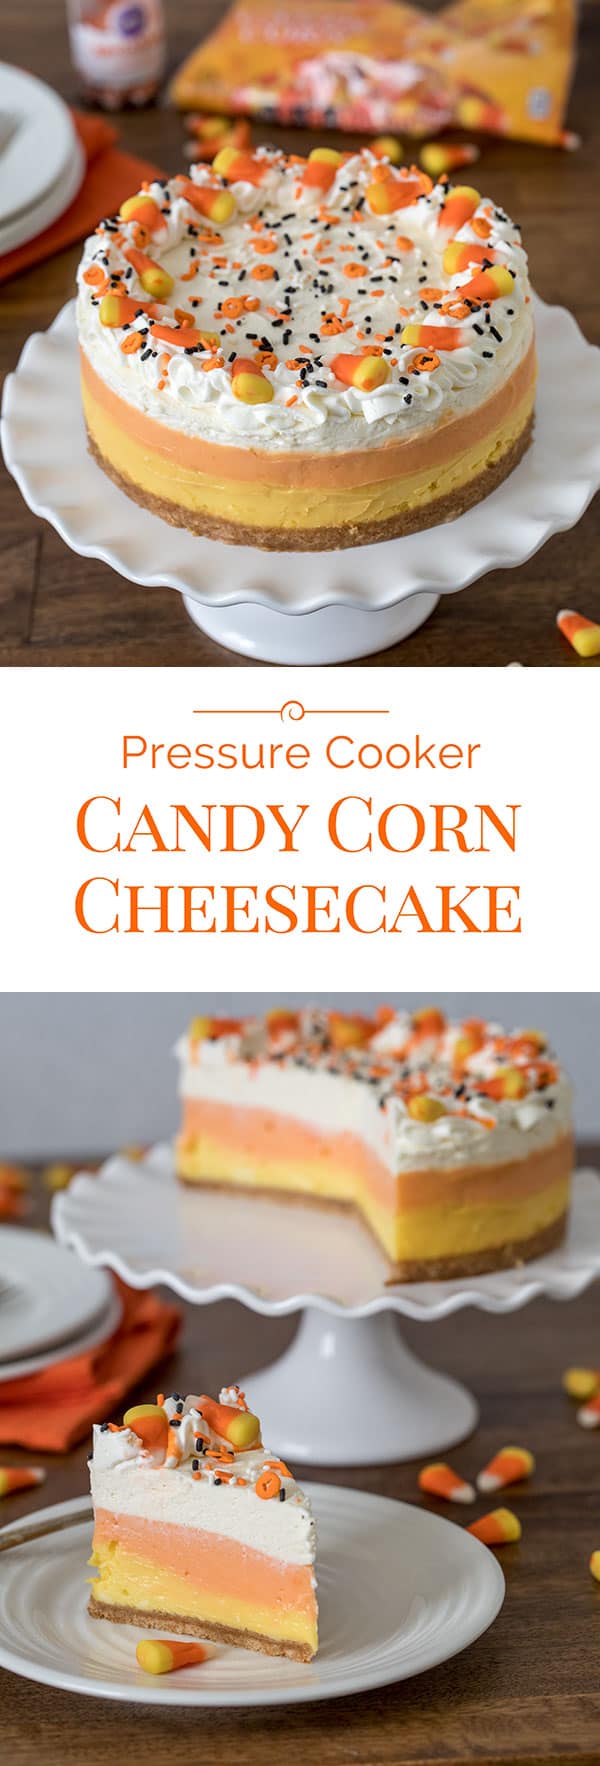 Pressure-Cooker-Candy-Cane-Cheesecake-Collage-2